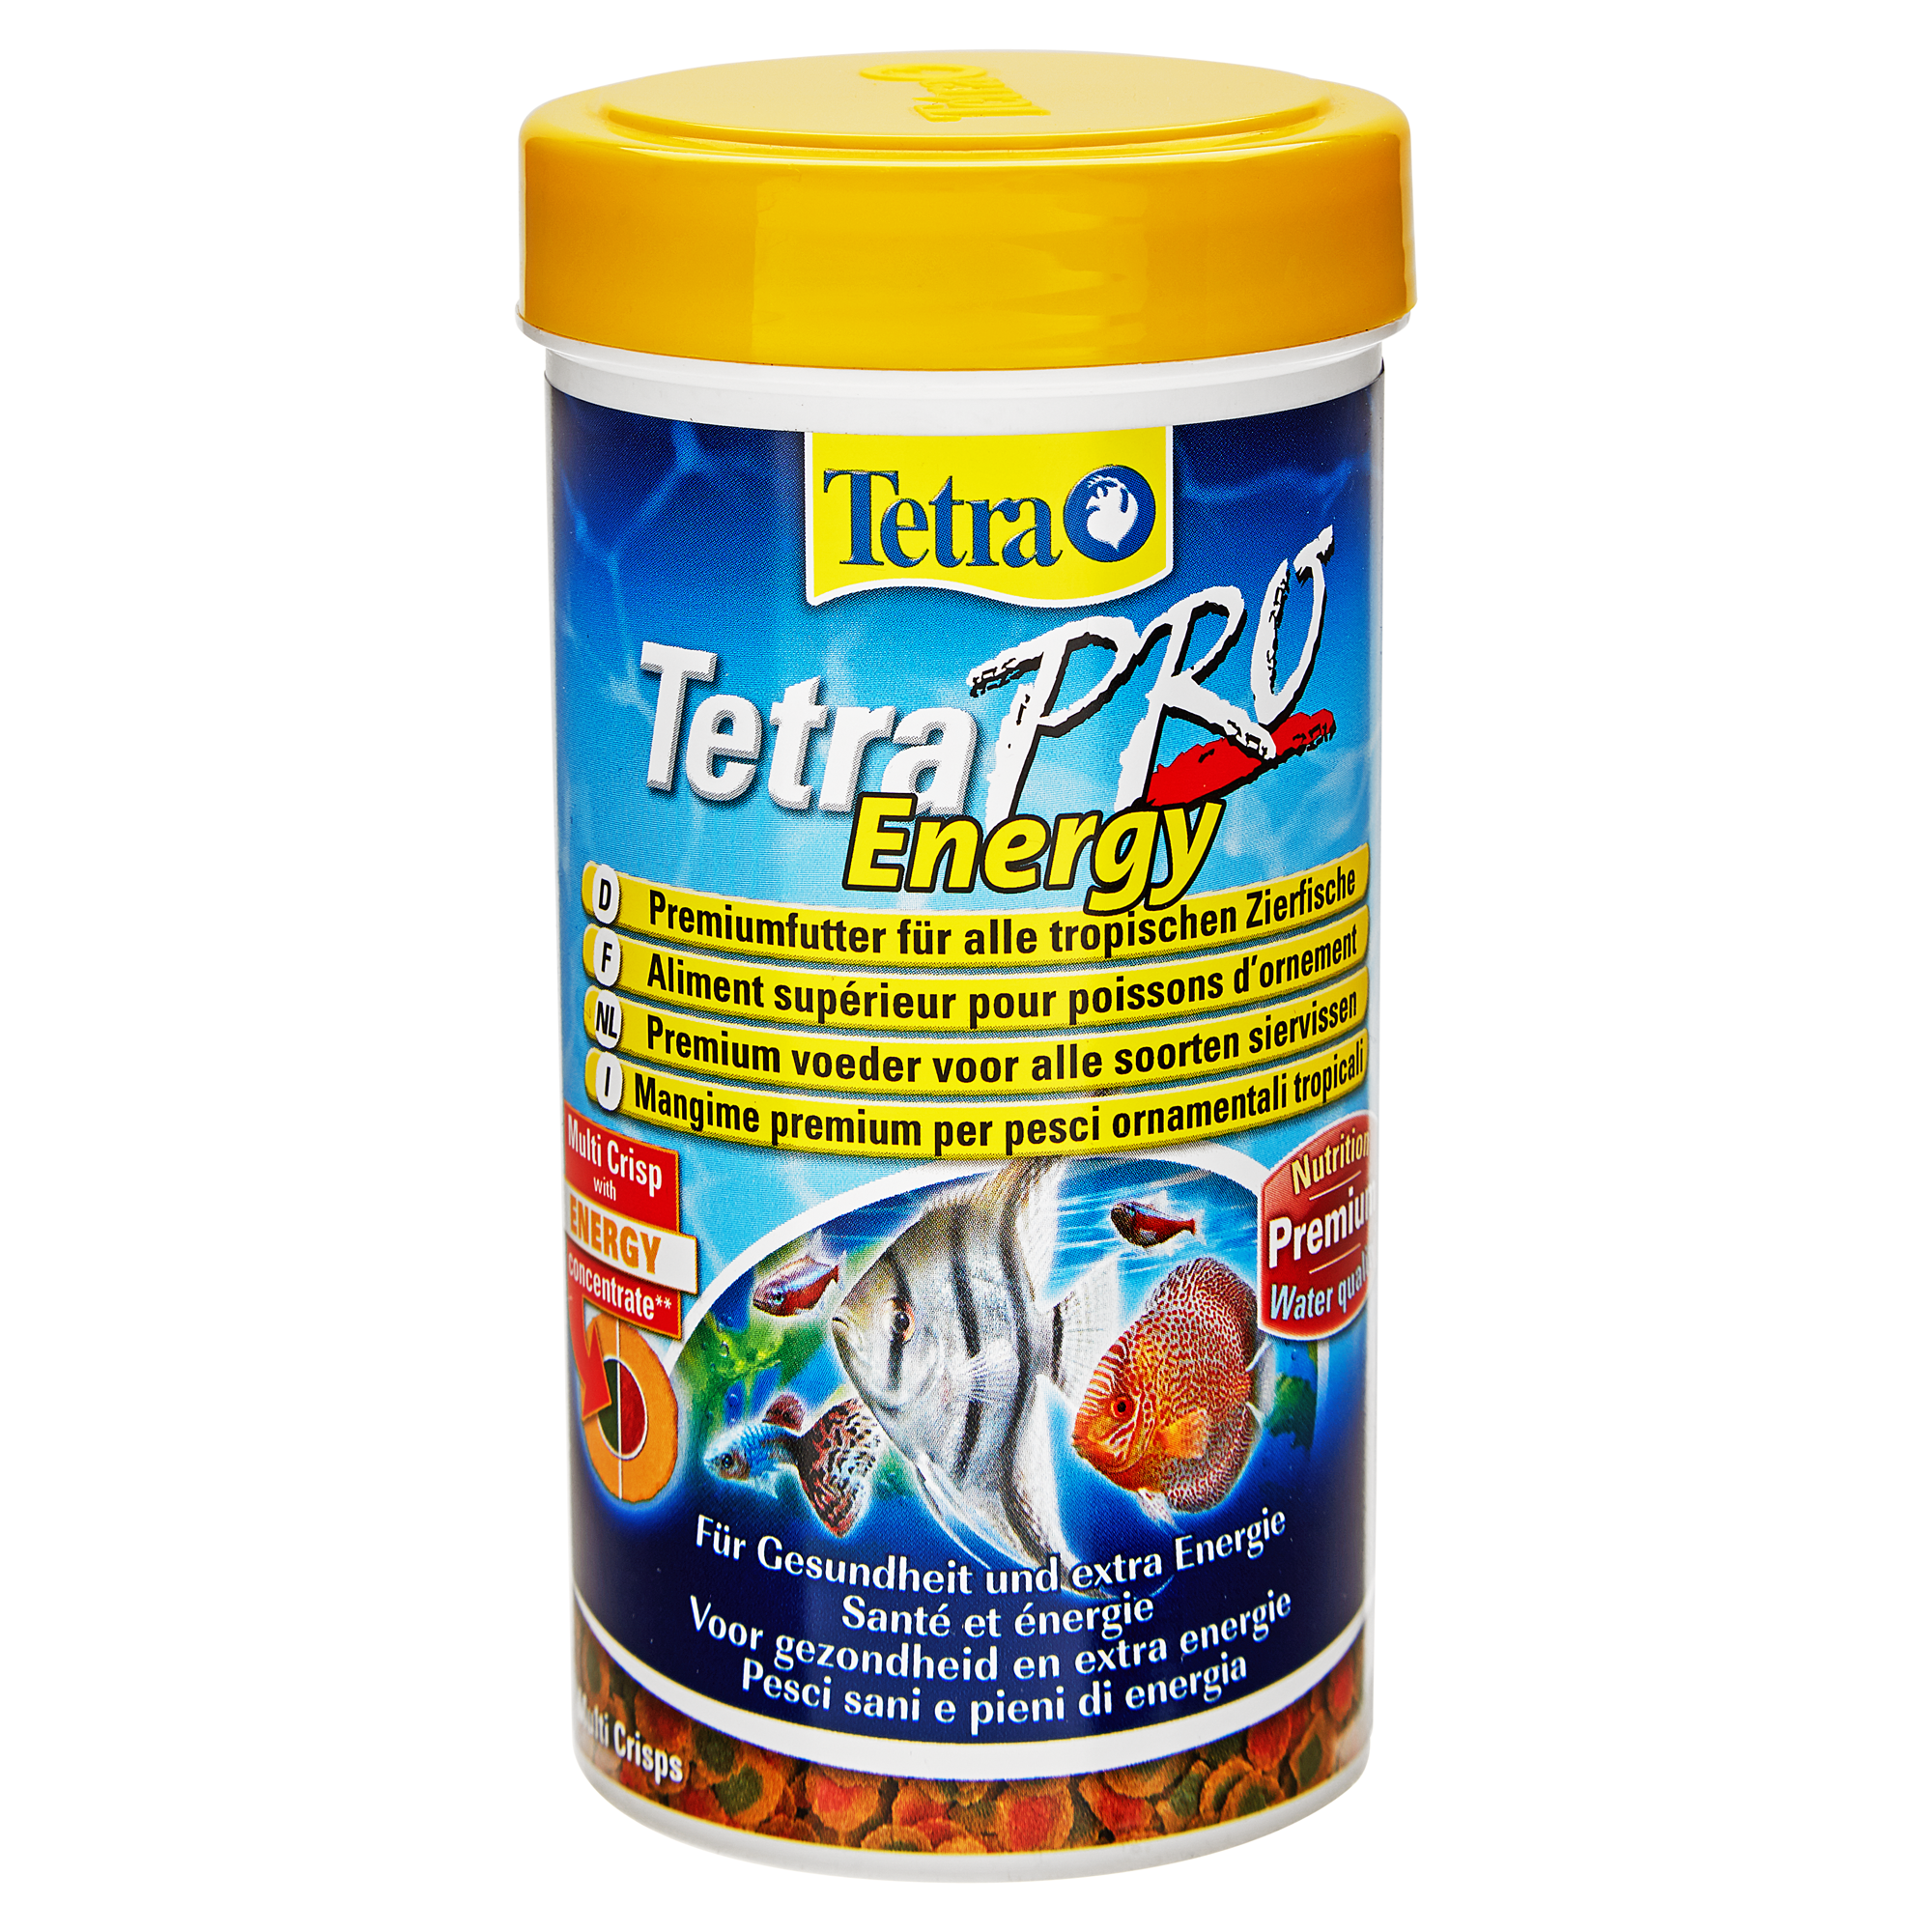 Fischfutter "Pro" Tetra Energy 55 g + product picture